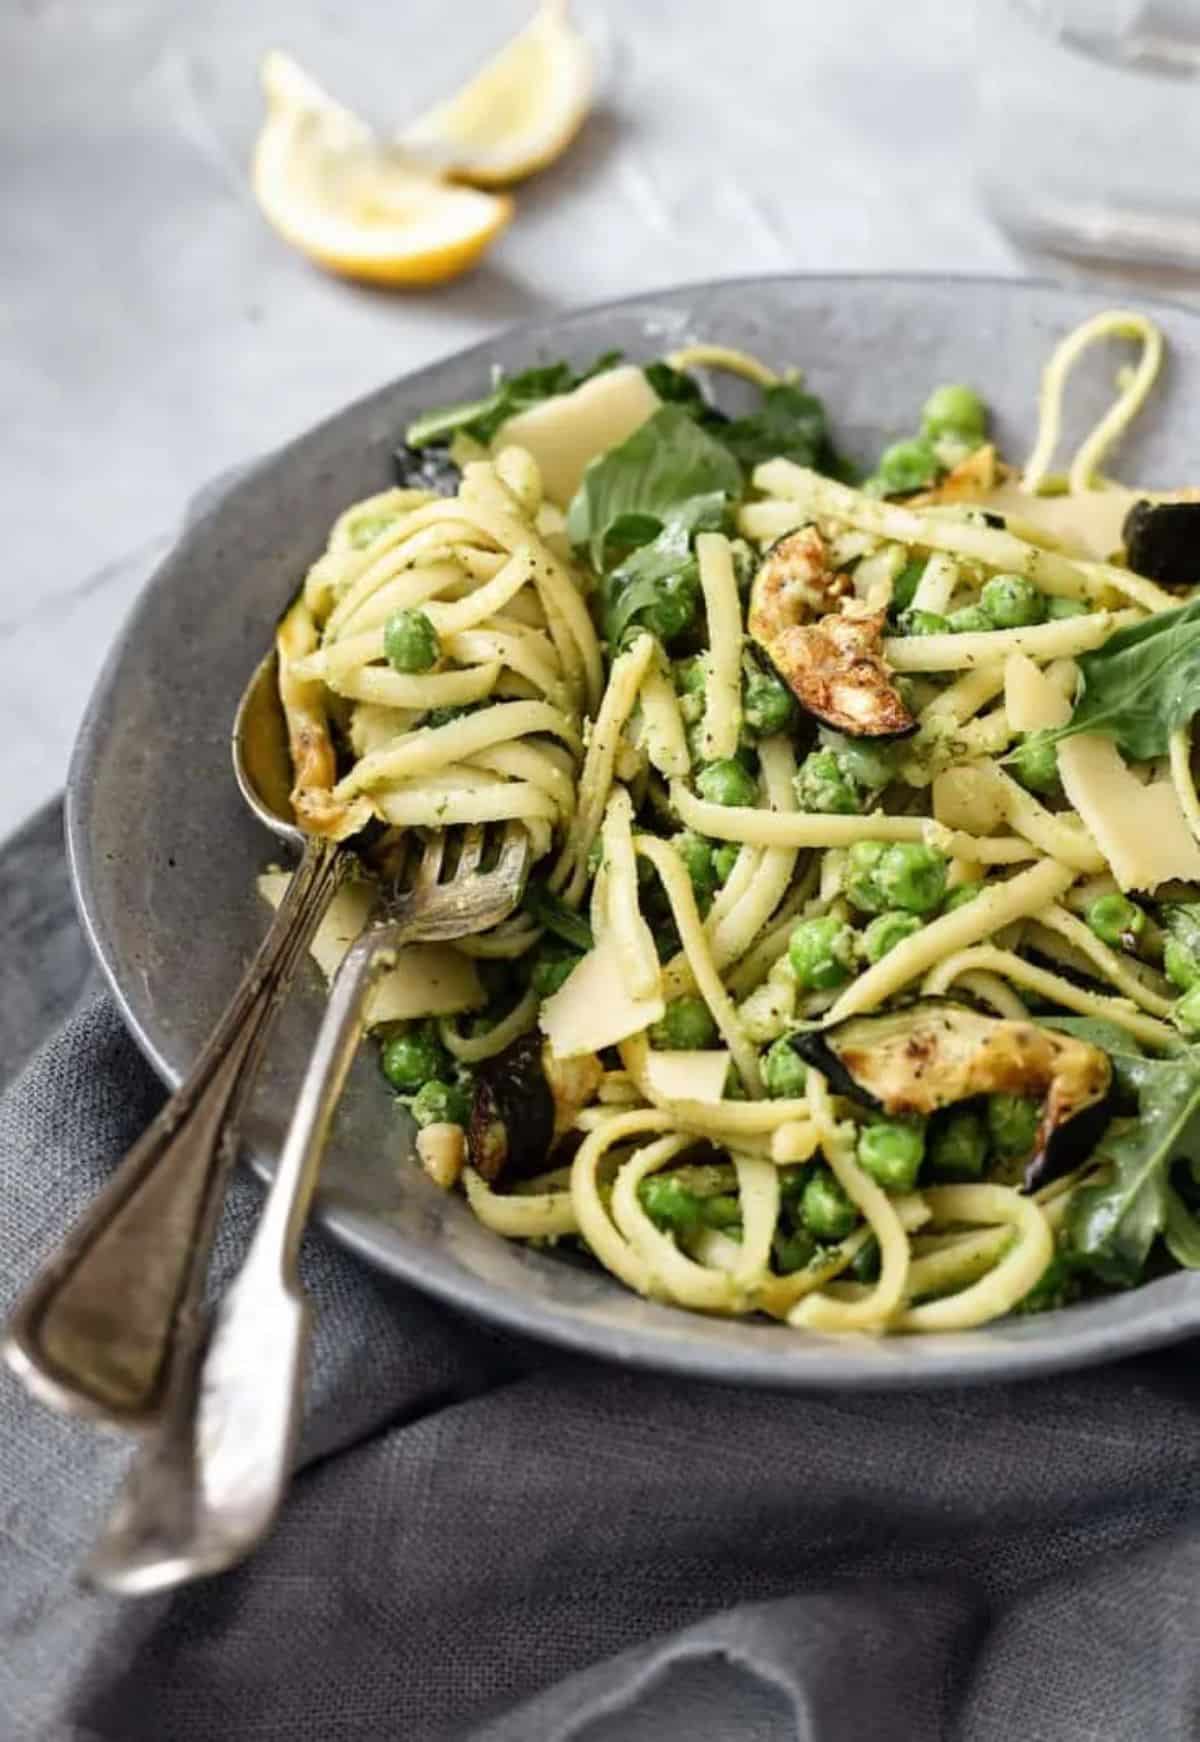 Healthy brazil nut pesto pasta in a gray bowl with cutlery.